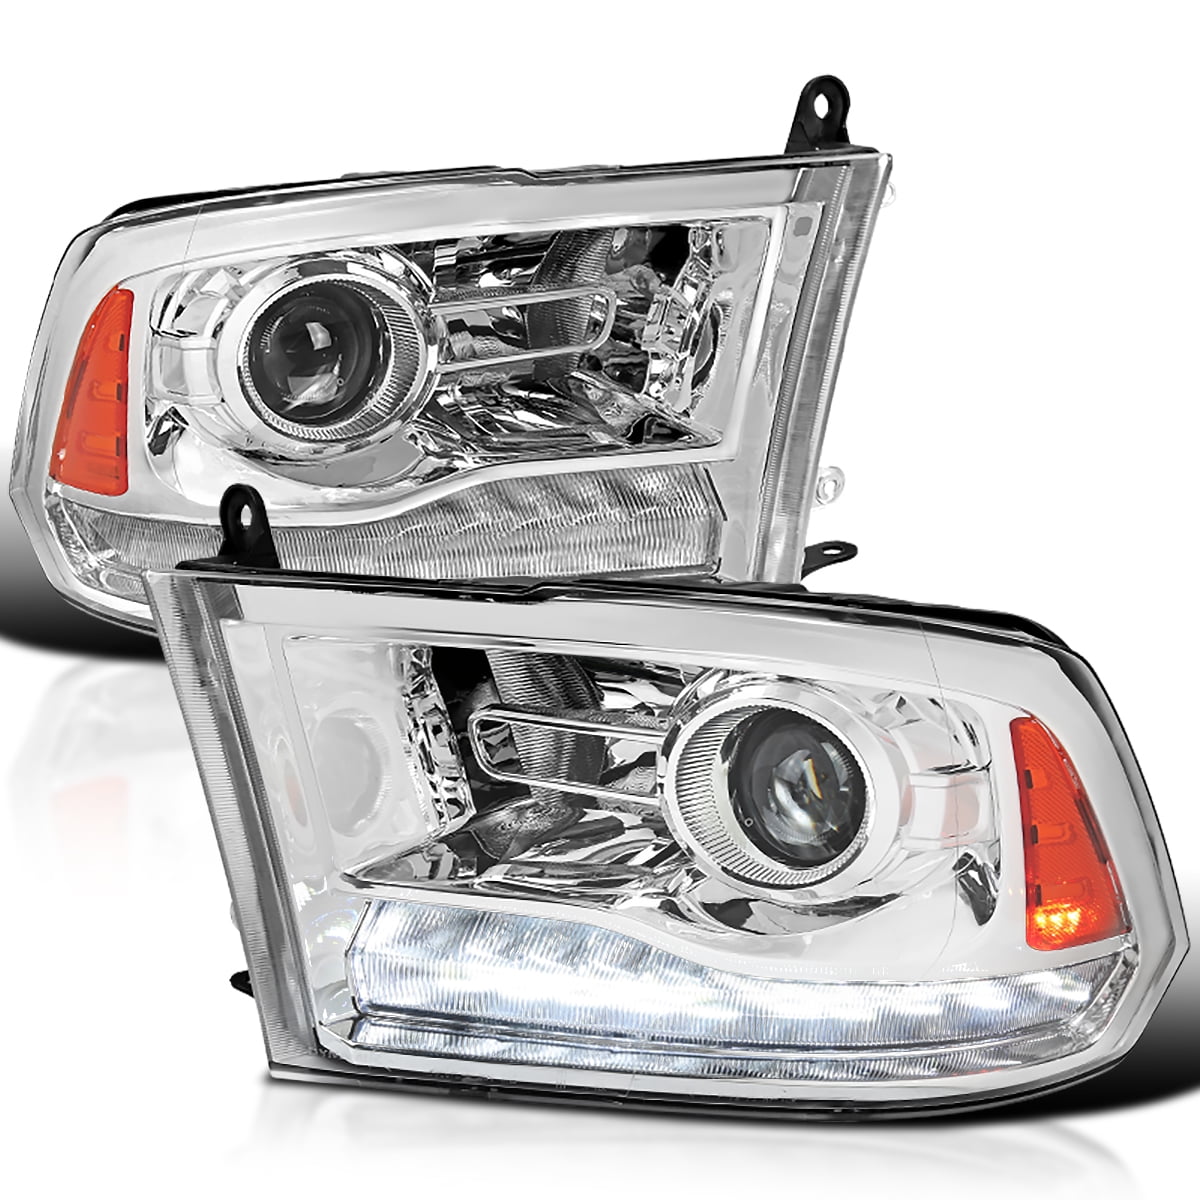 Spec-D Tuning Black Housing Smoke Lens Projector Headlights + Switchback  LED Signal Strip Compatible with 2009-2018 Dodge Ram 1500 2500 3500 Left + Right  Pair Headlamps Assembly 